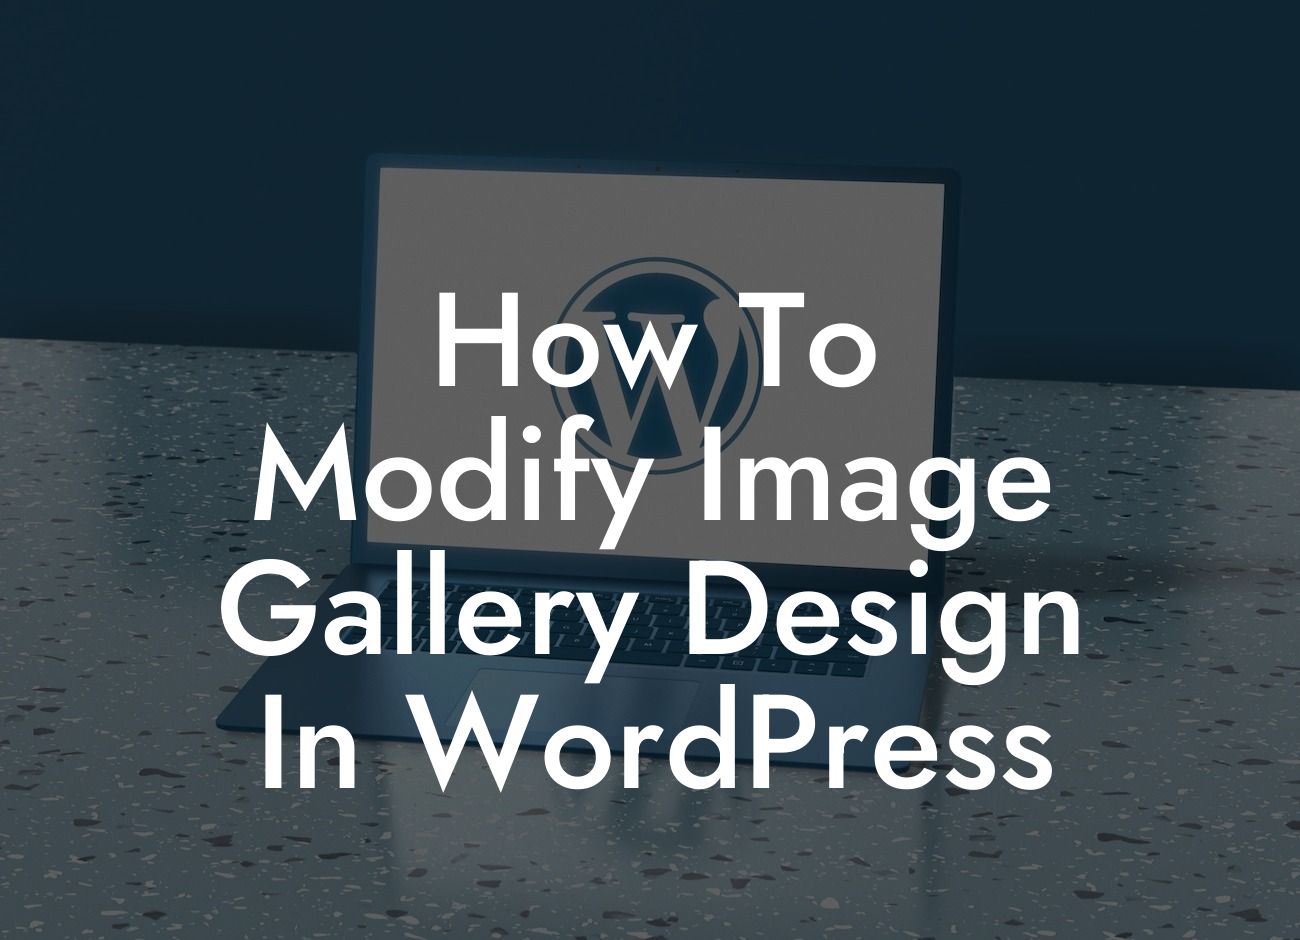 How To Modify Image Gallery Design In WordPress